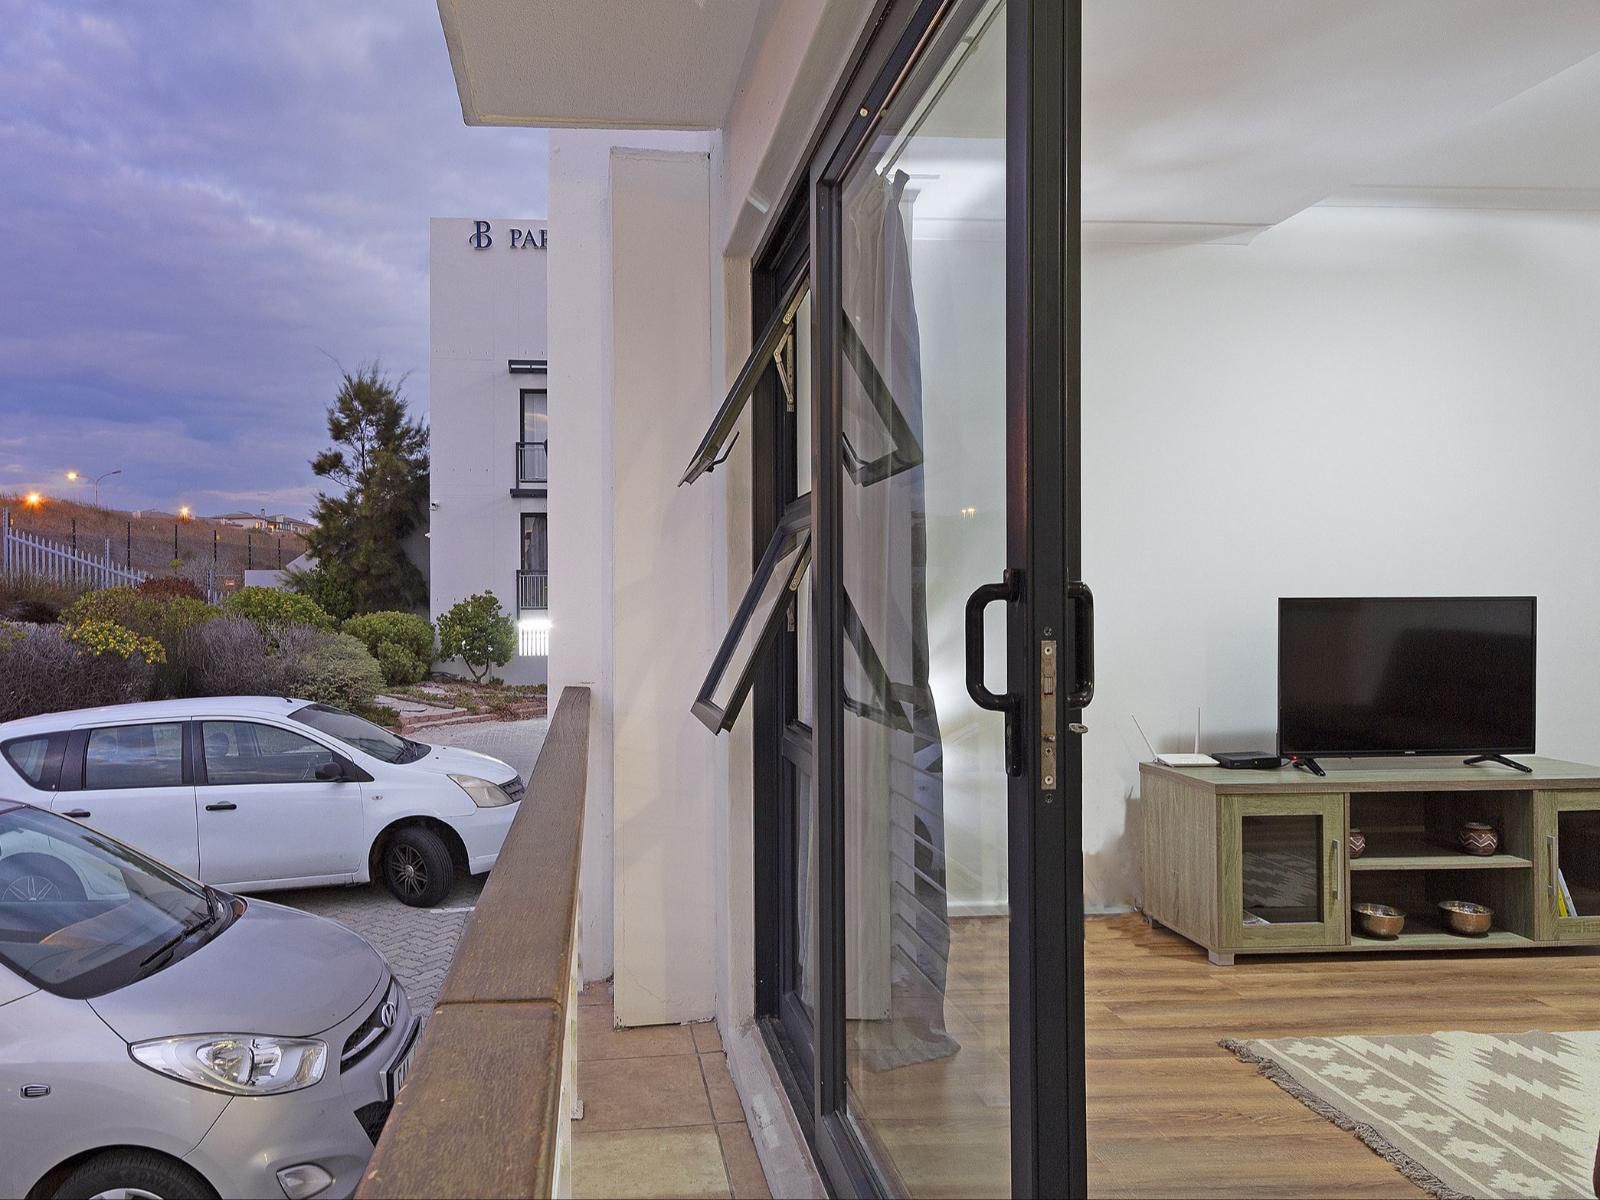 Azure 11 By Hostagents Big Bay Blouberg Western Cape South Africa House, Building, Architecture, Car, Vehicle